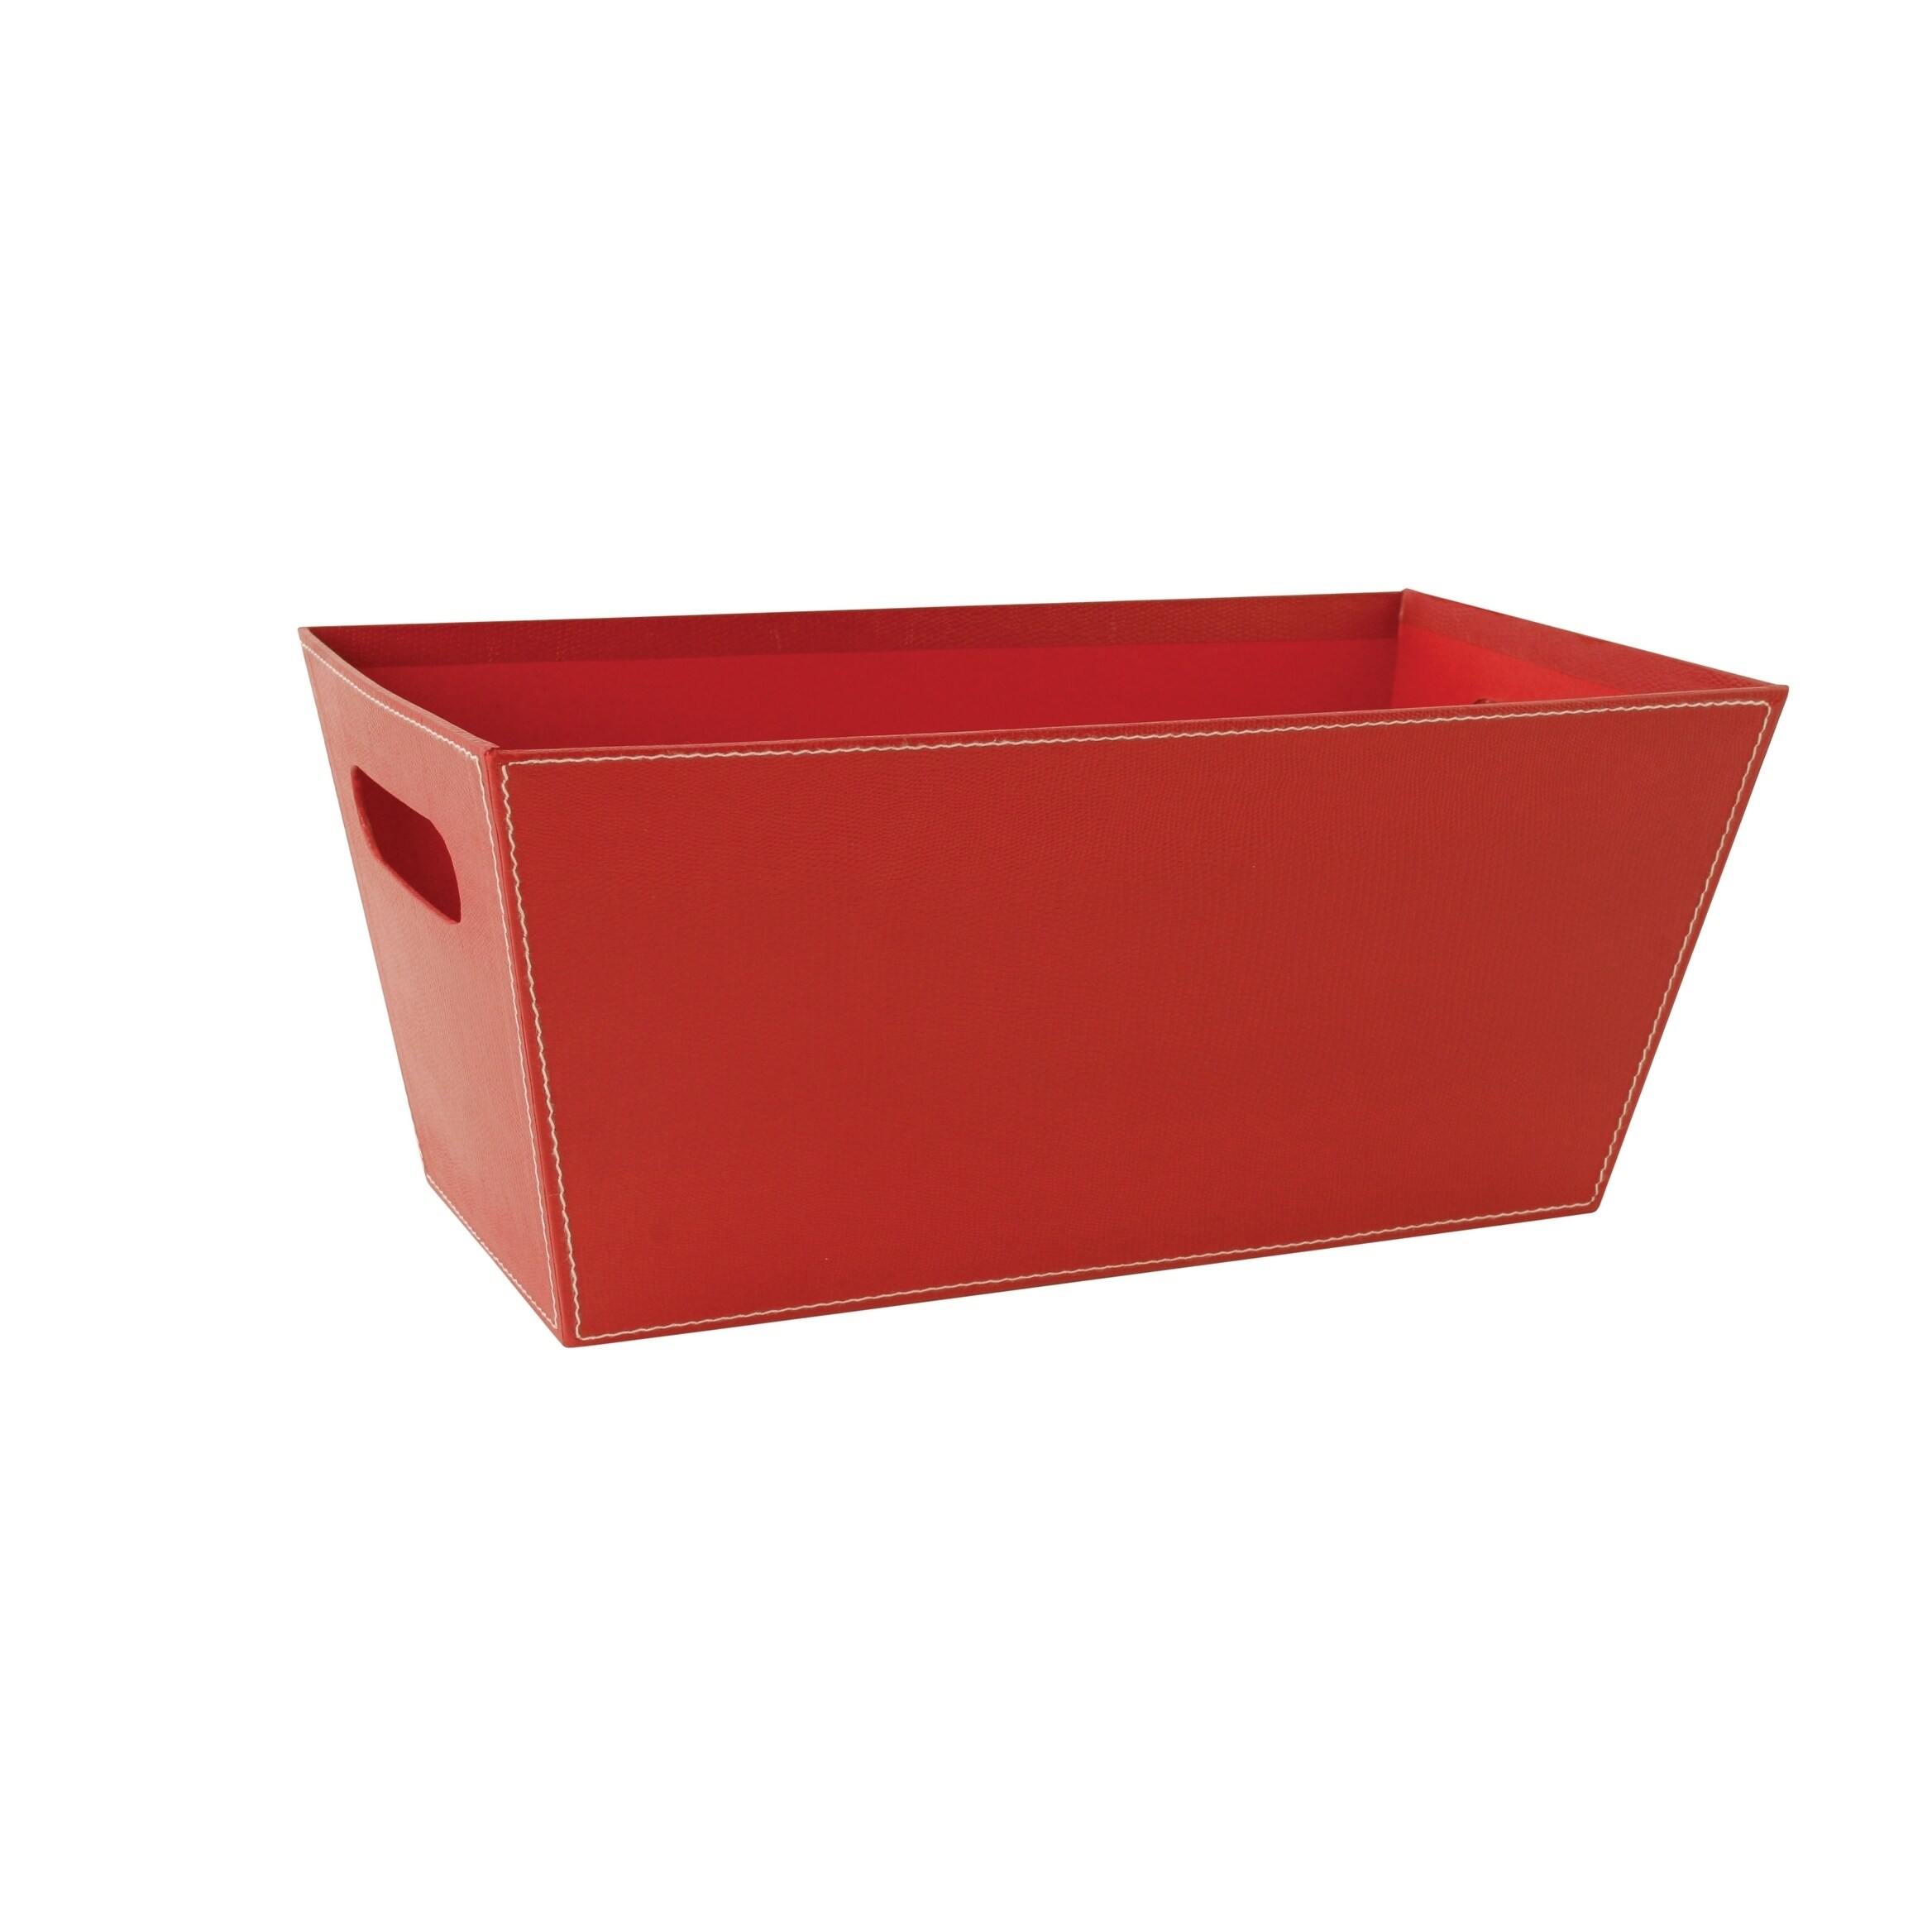 13" Red Paperboard Tote - image 1 of 2